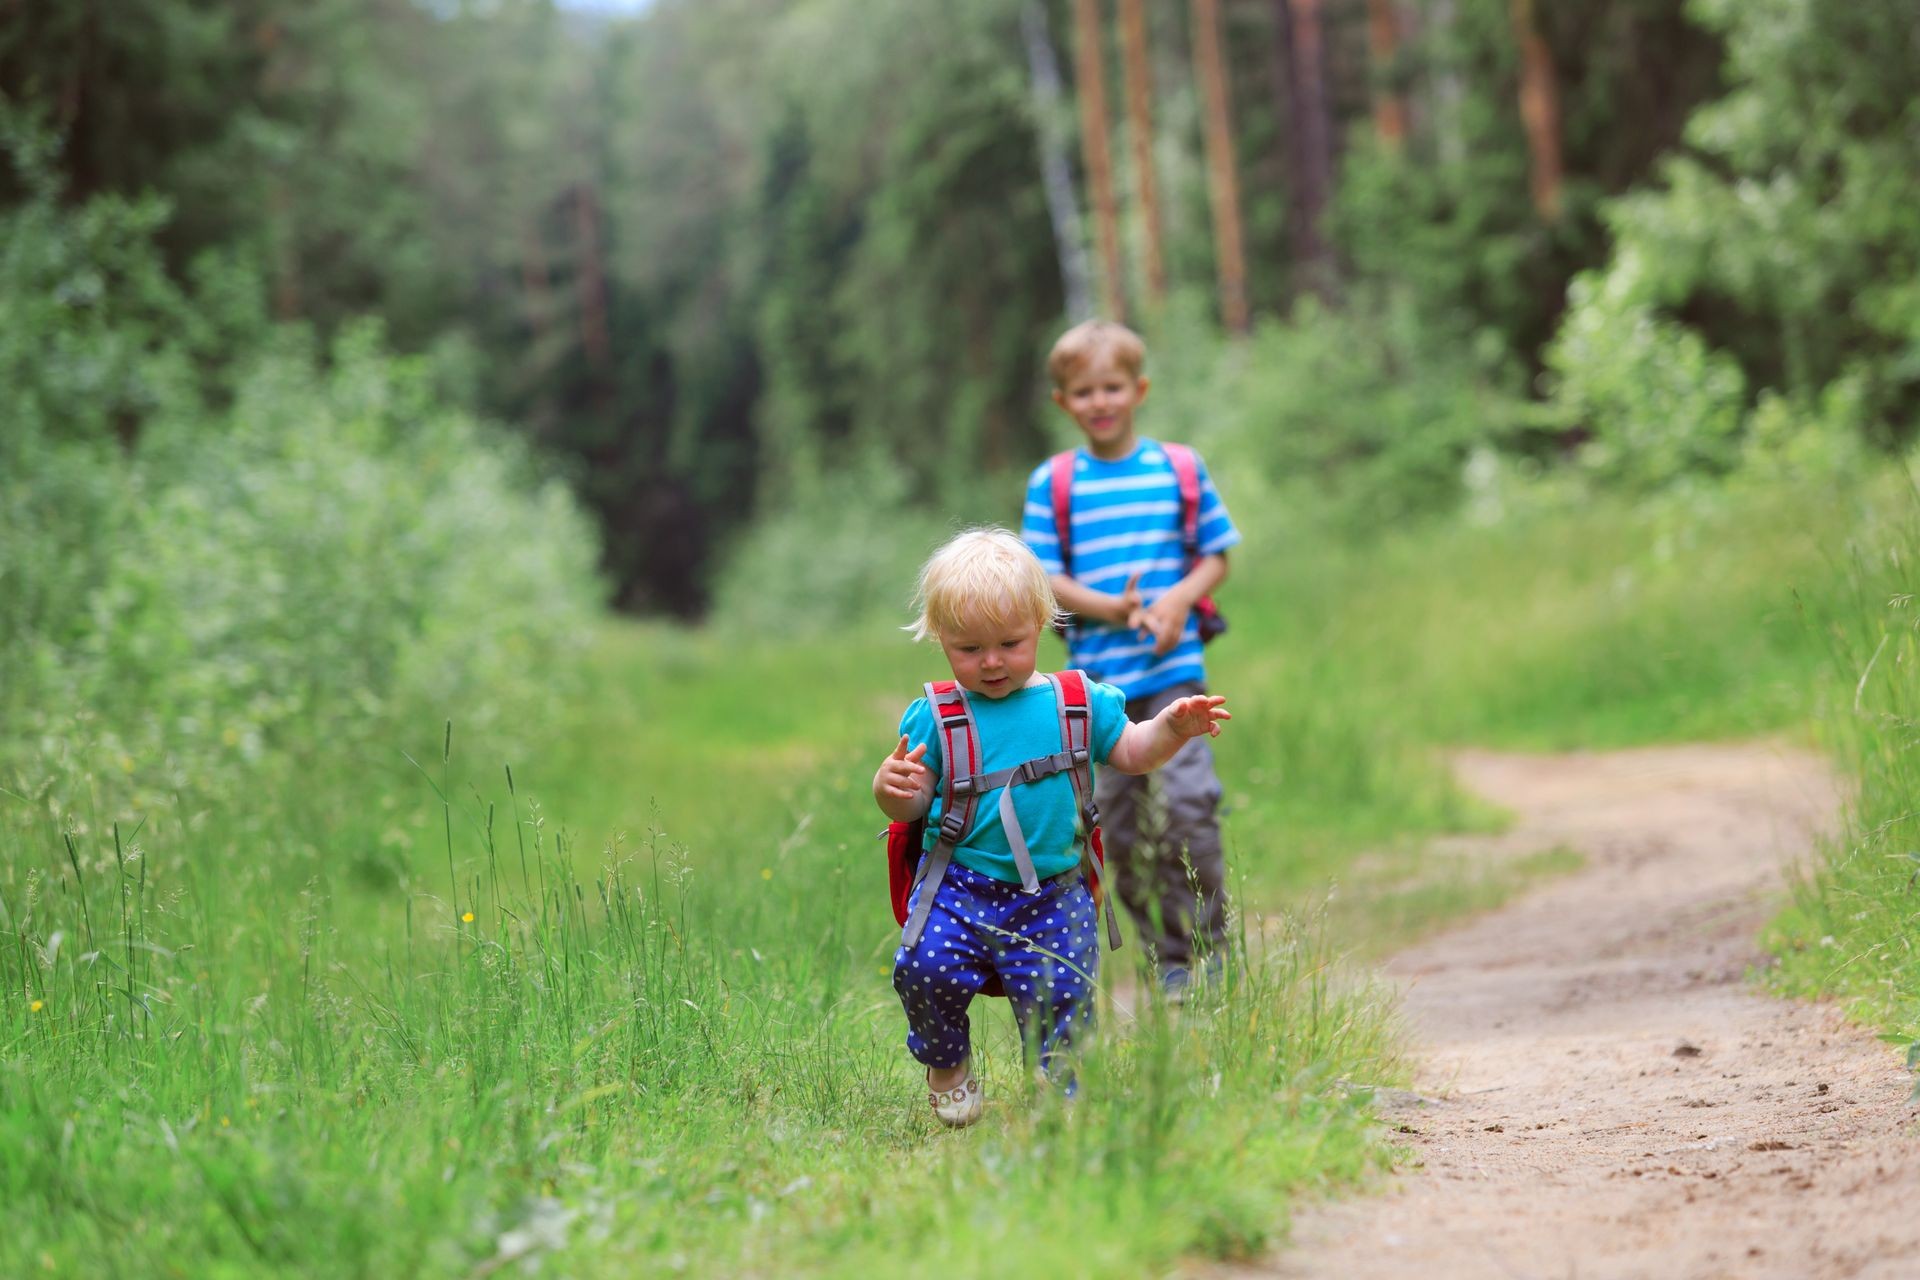 kids go to school, daycare or hiking in nature